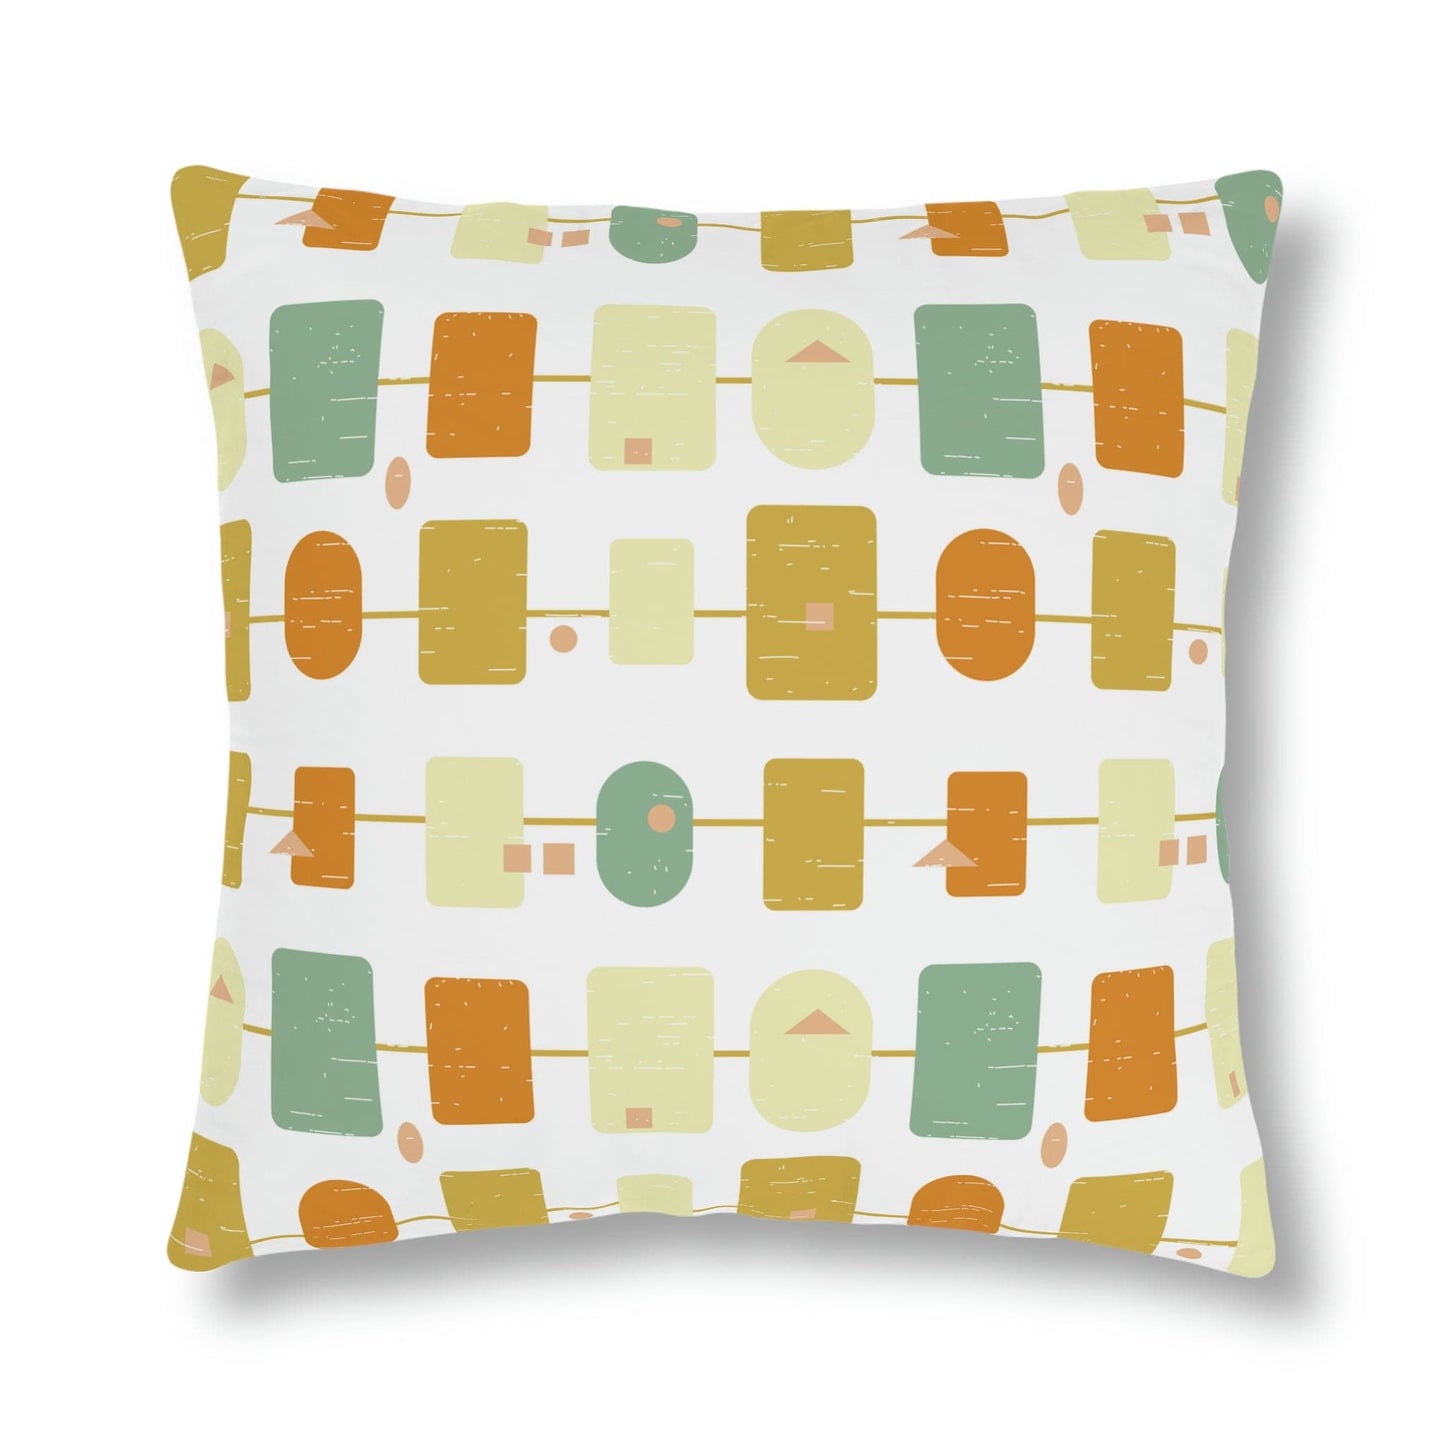 Kate McEnroe New York Outdoor Pillow in Mid Century Modern Abstract Geometric Print Outdoor Pillows